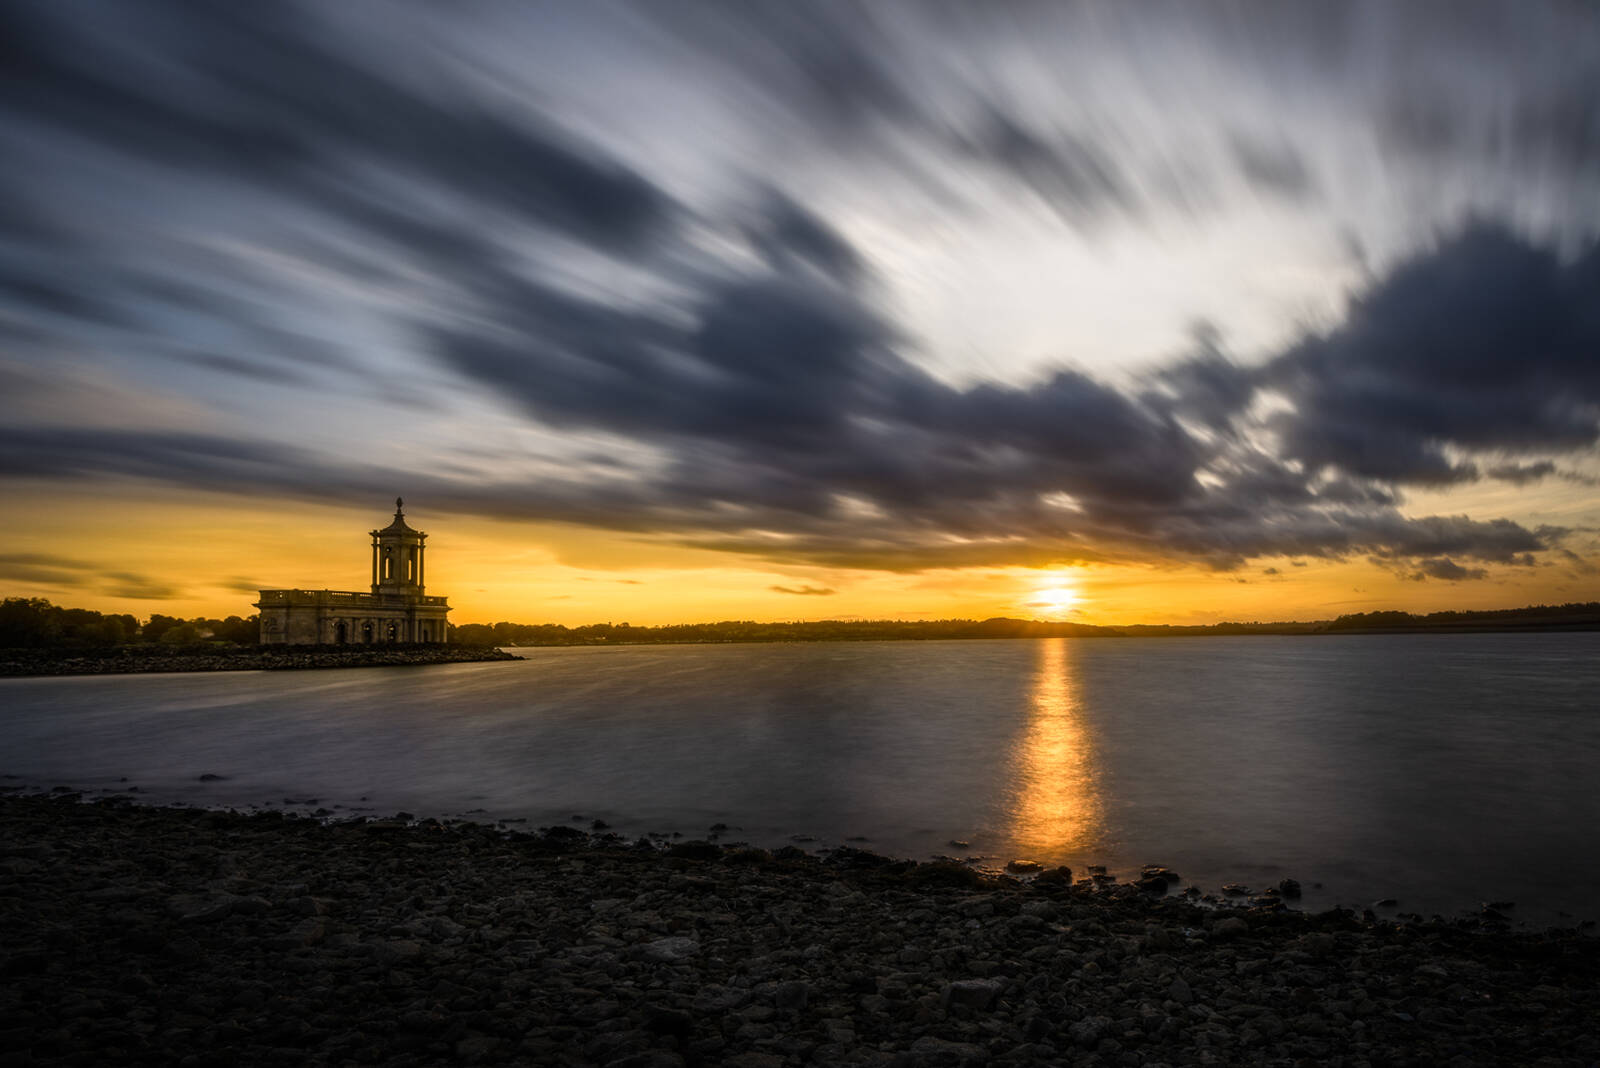 Image of Normanton Church by Sandy Knight